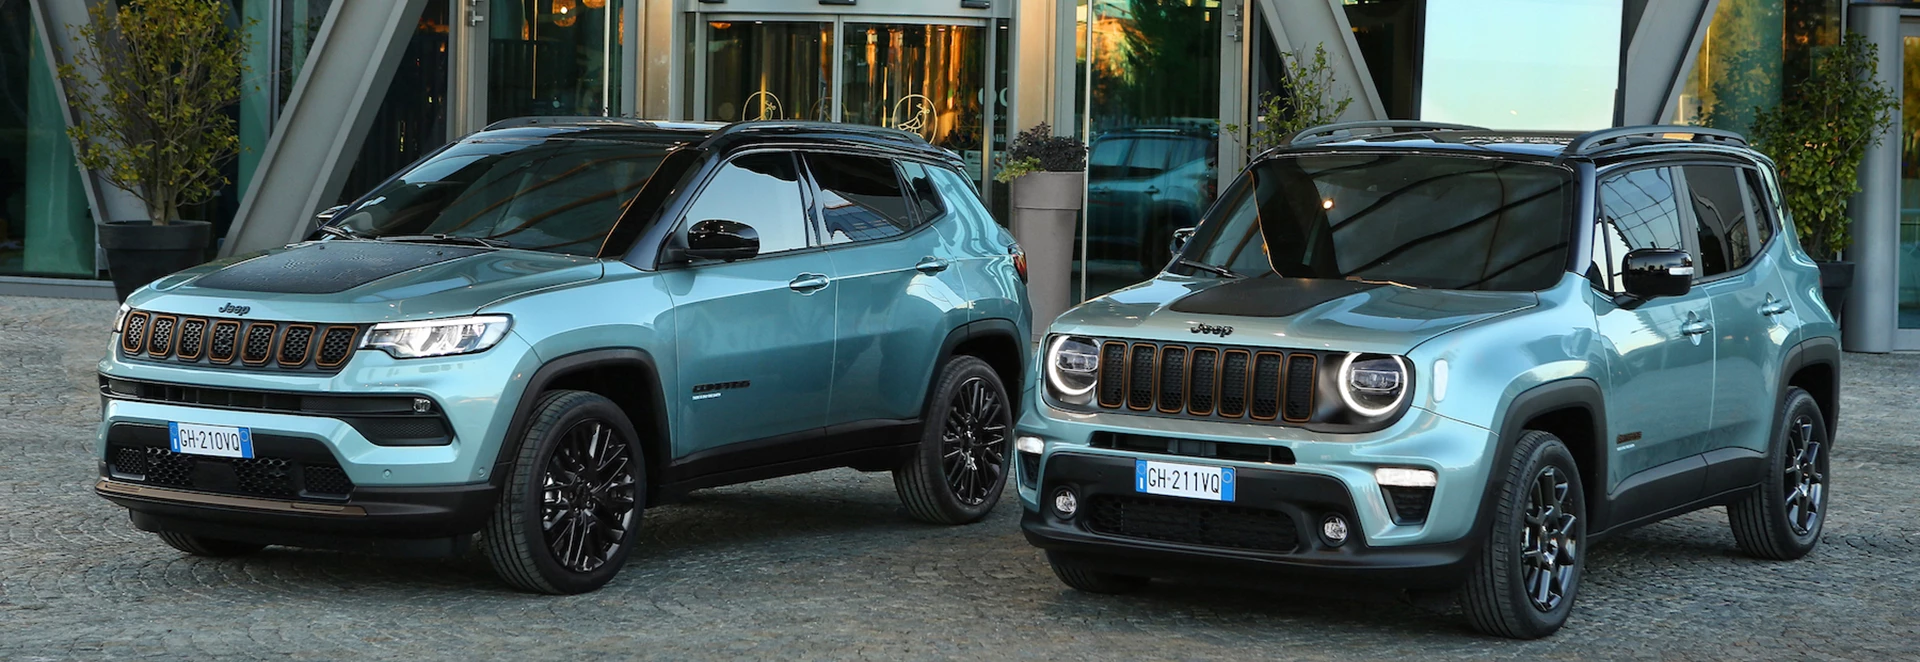 Jeep introduces mild e-Hybrid powertrain to Renegade and Compass crossovers 